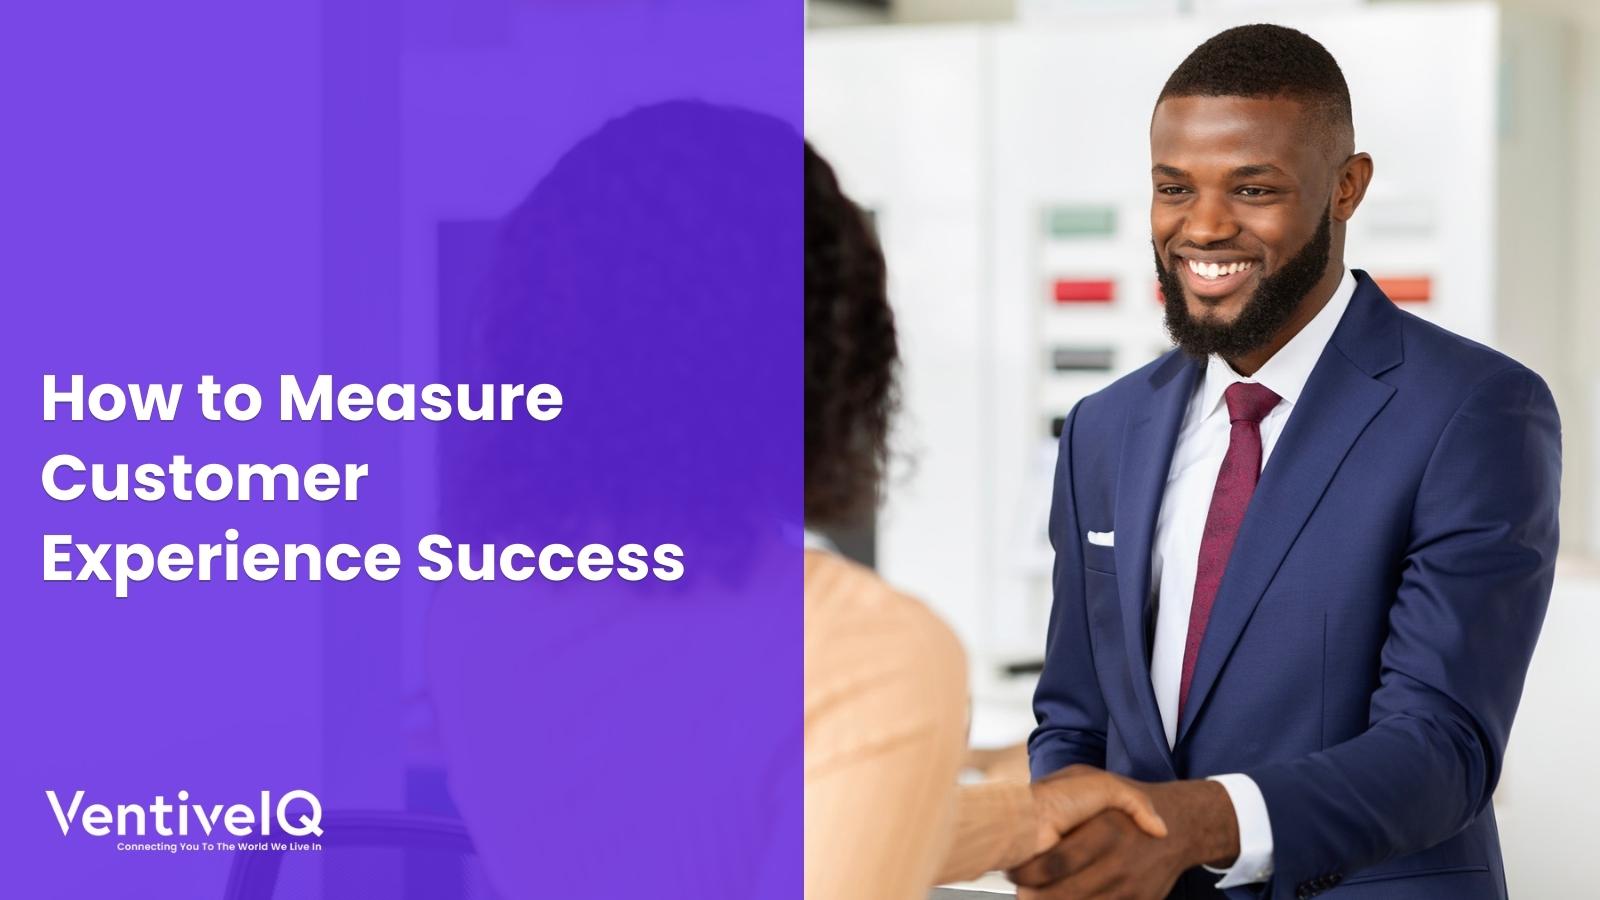 How to Measure Customer Experience Success